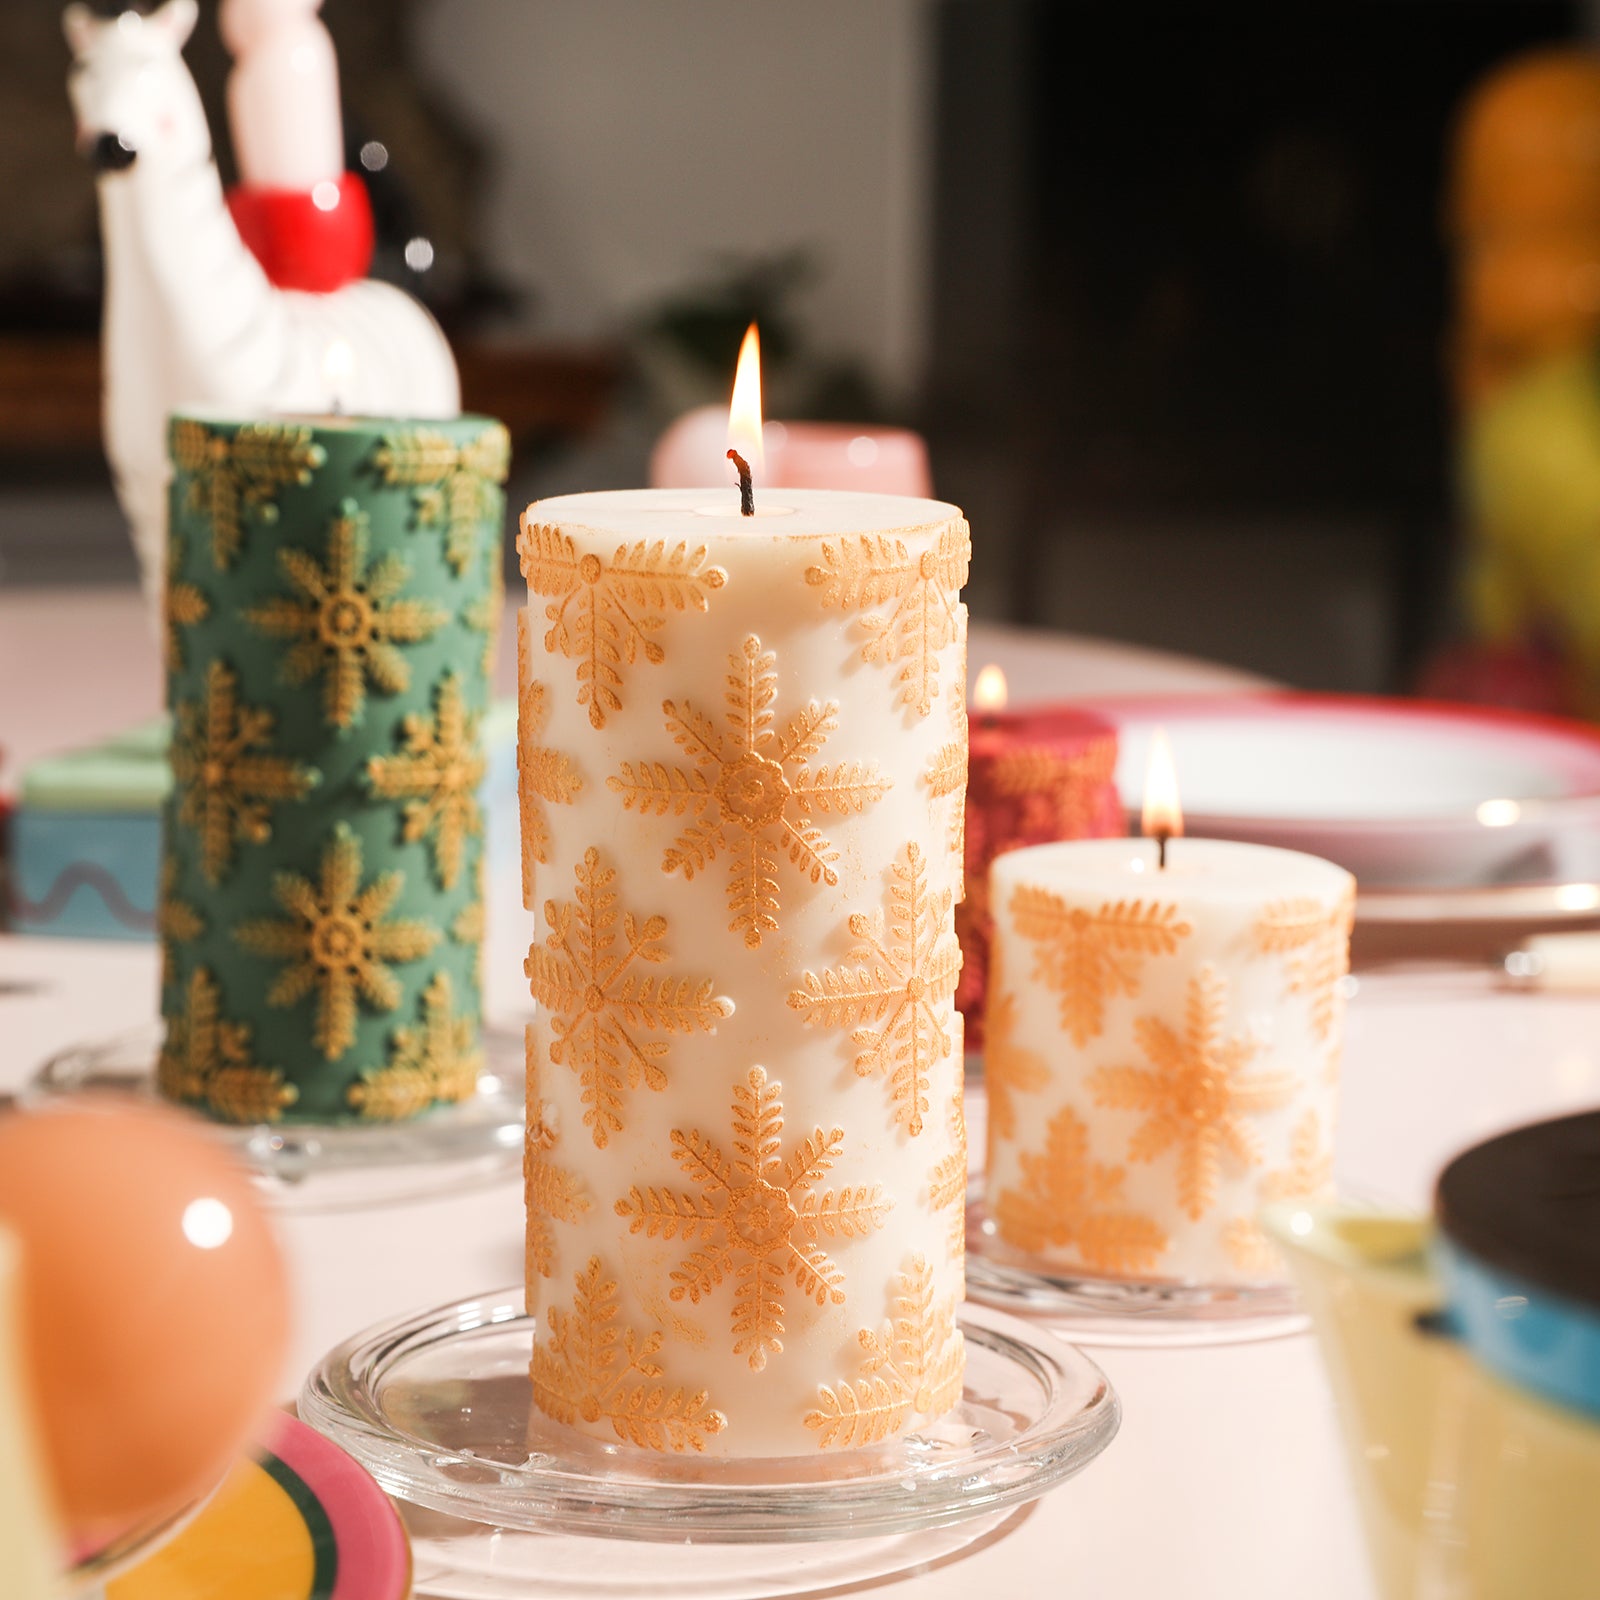 Christmas Candle Collection Silicone Mold with Snowflake Pattern